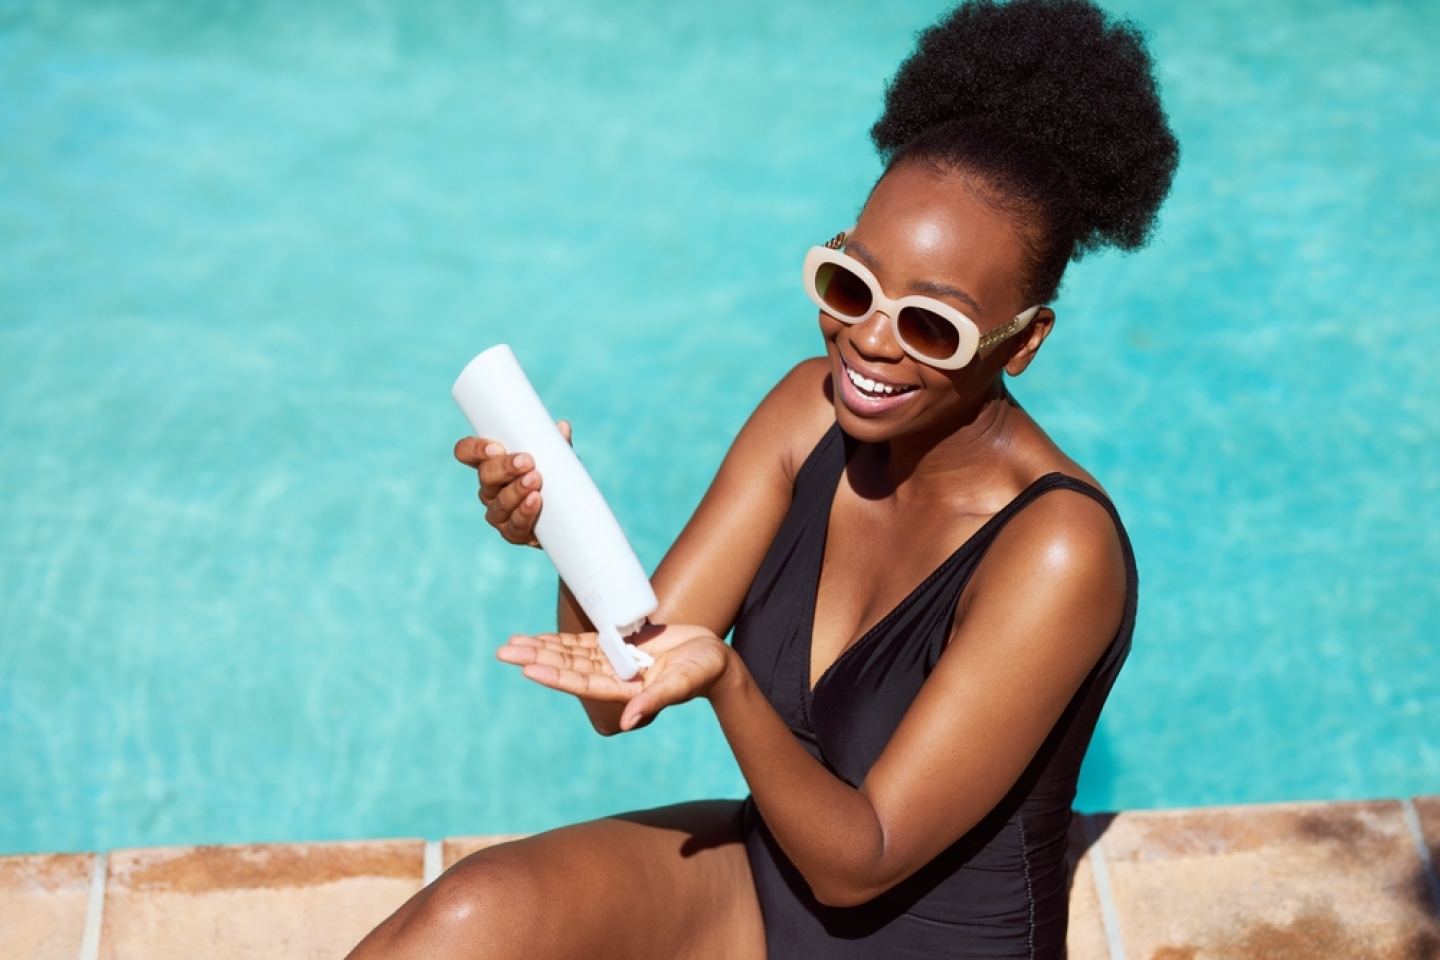 woman applies sunscreen sitting by pool in summer sun